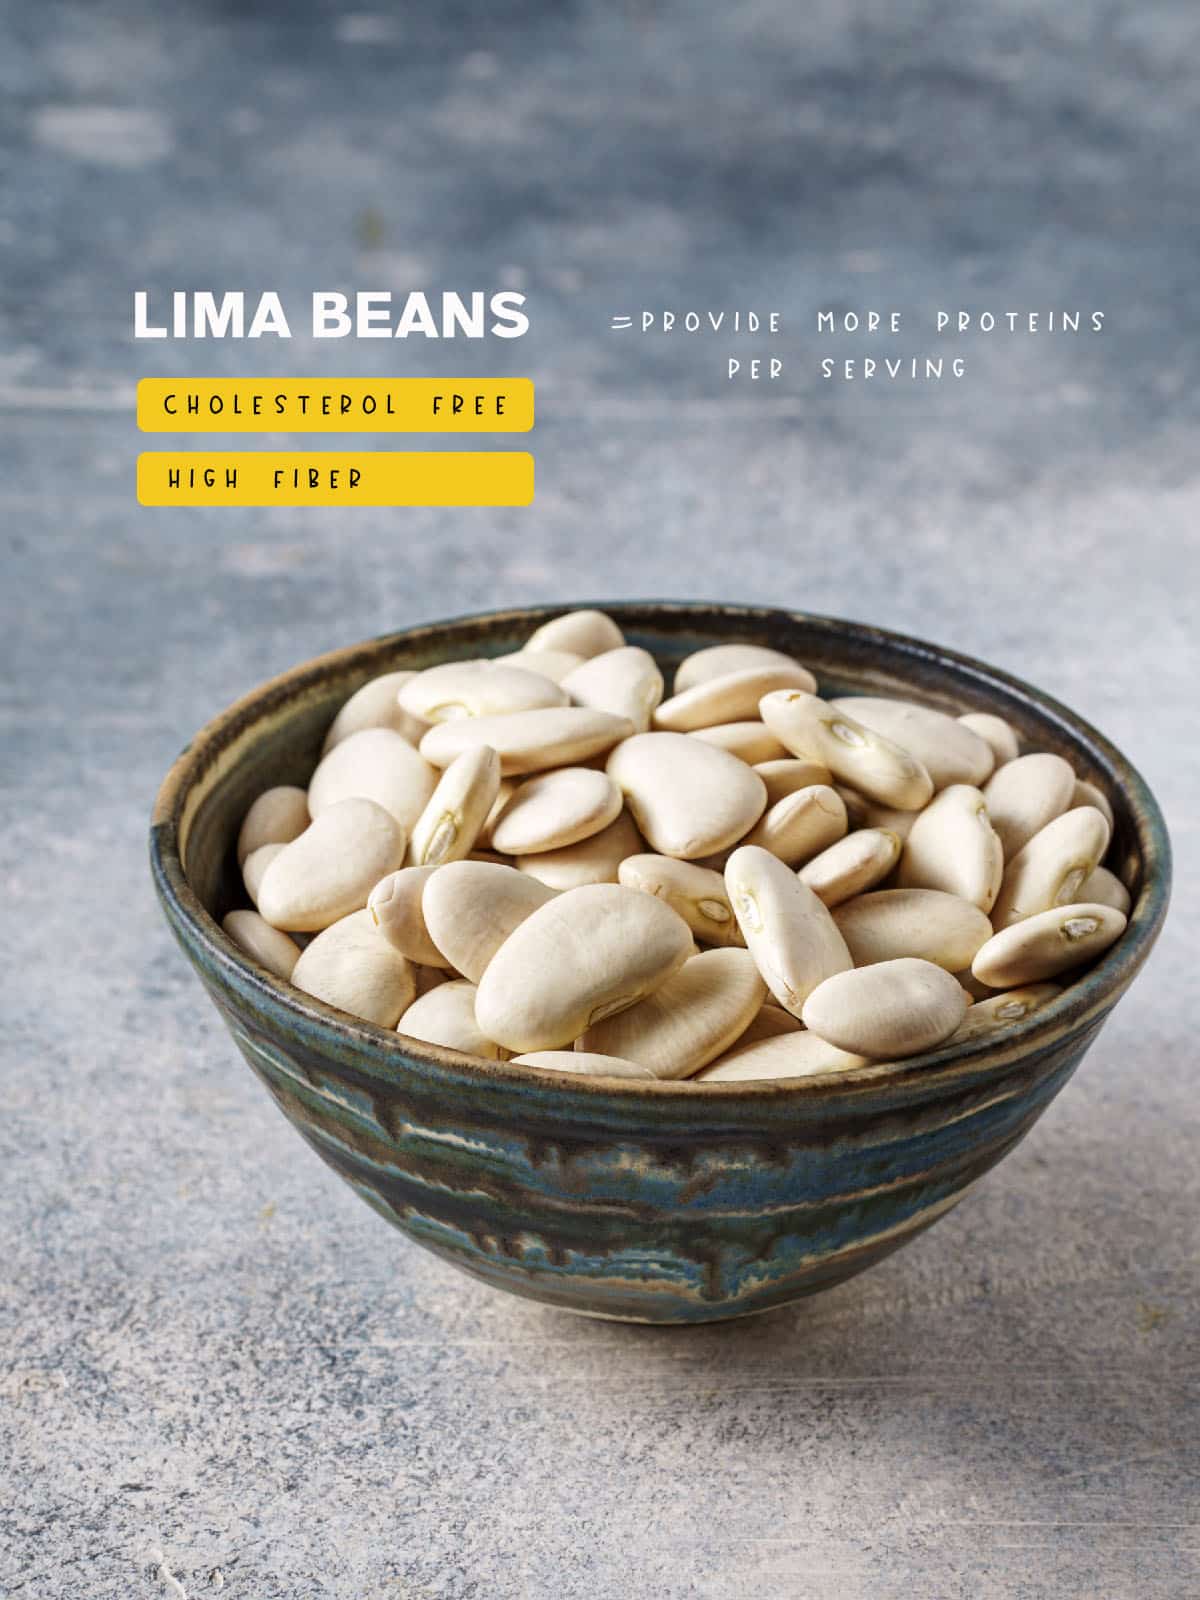 Edamame and lima beans are two different types of legumes. Many people might not know the difference between the two, but there is a big difference.